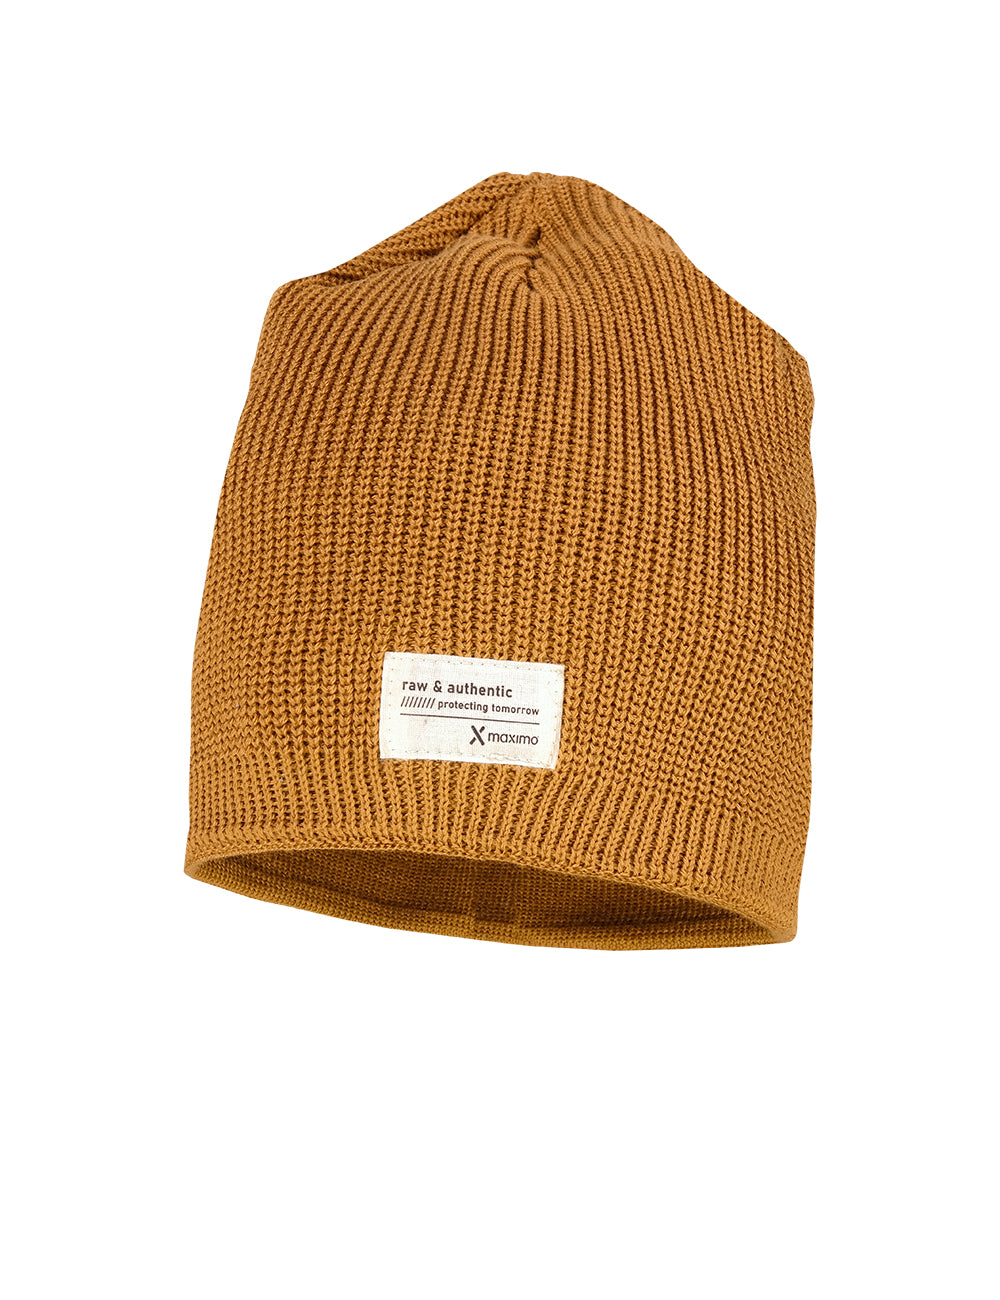 KIDS Beanie middle